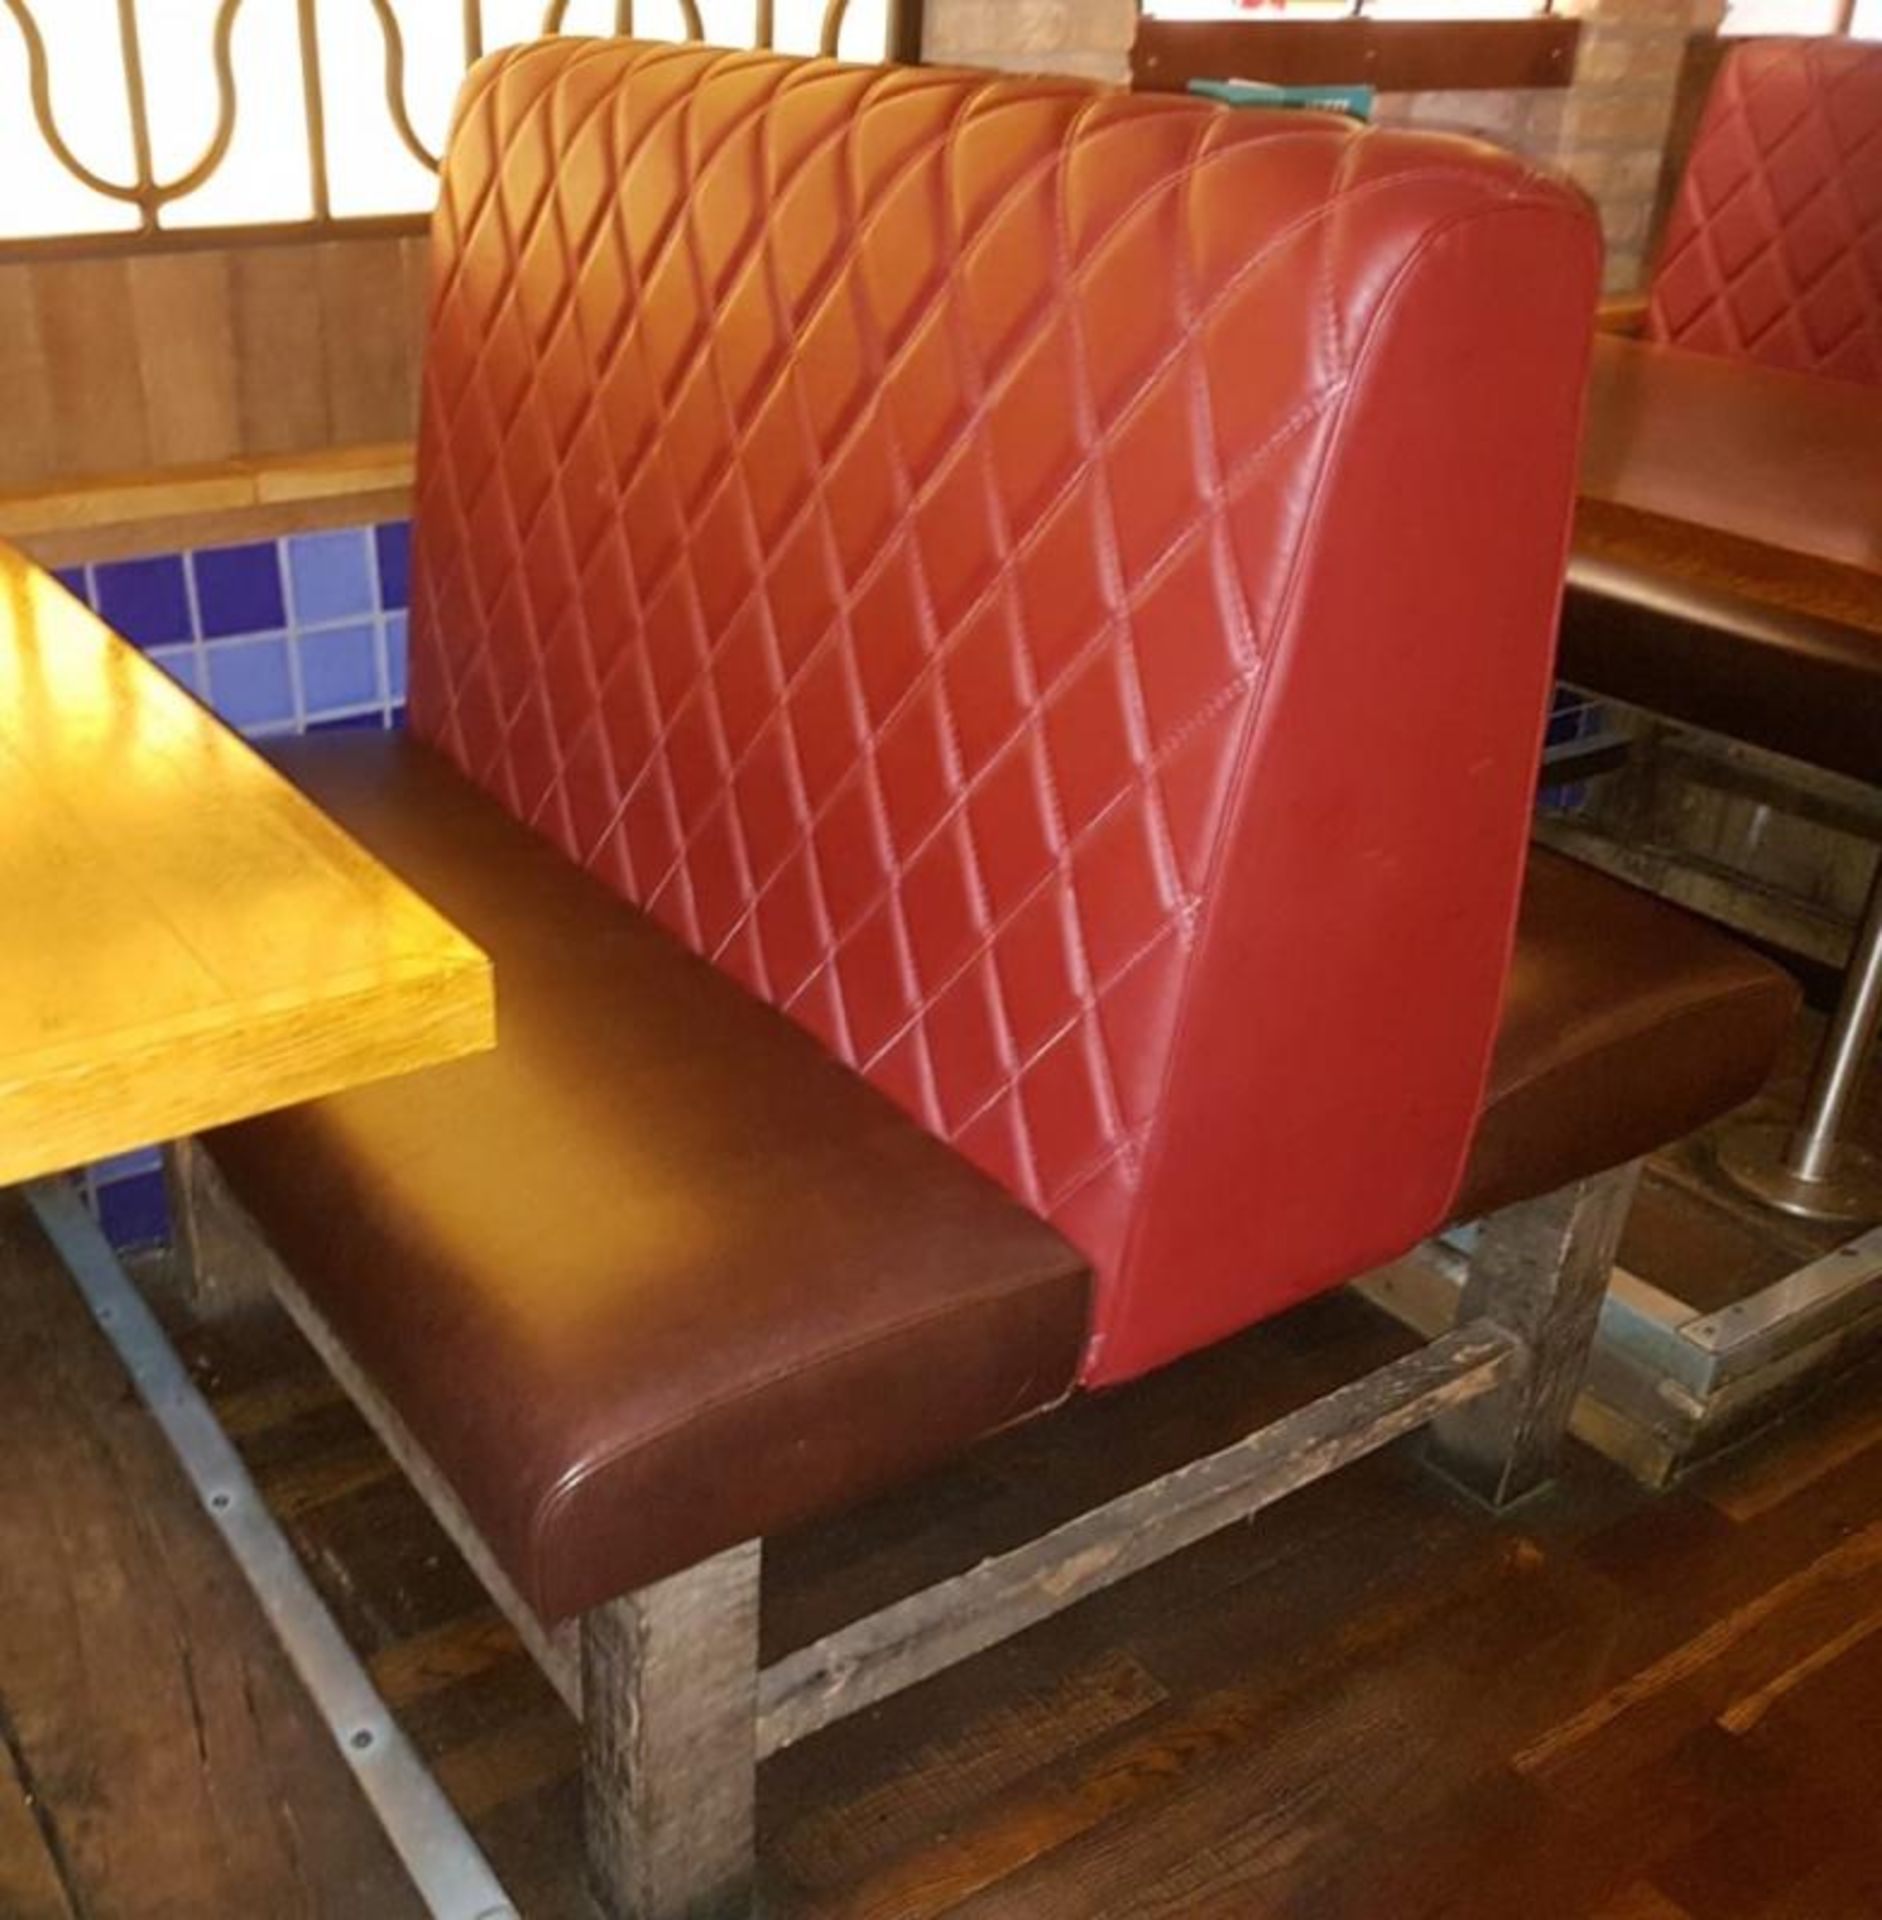 13 x Selection of Contemporary Restaurant Seating With Red and Brown Faux Leather Upholstery and - Image 8 of 8